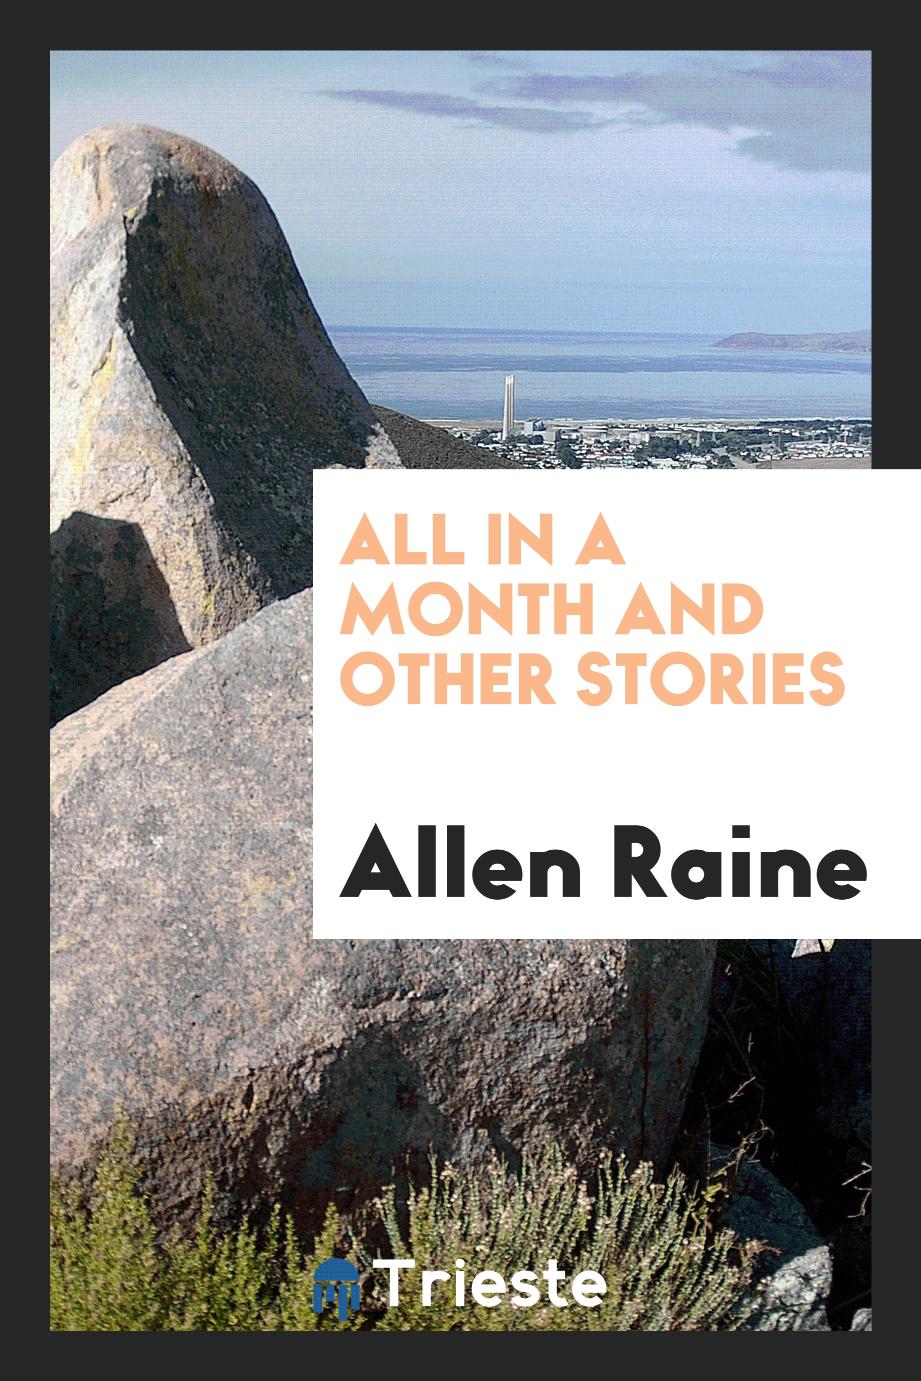 All in a Month and Other Stories